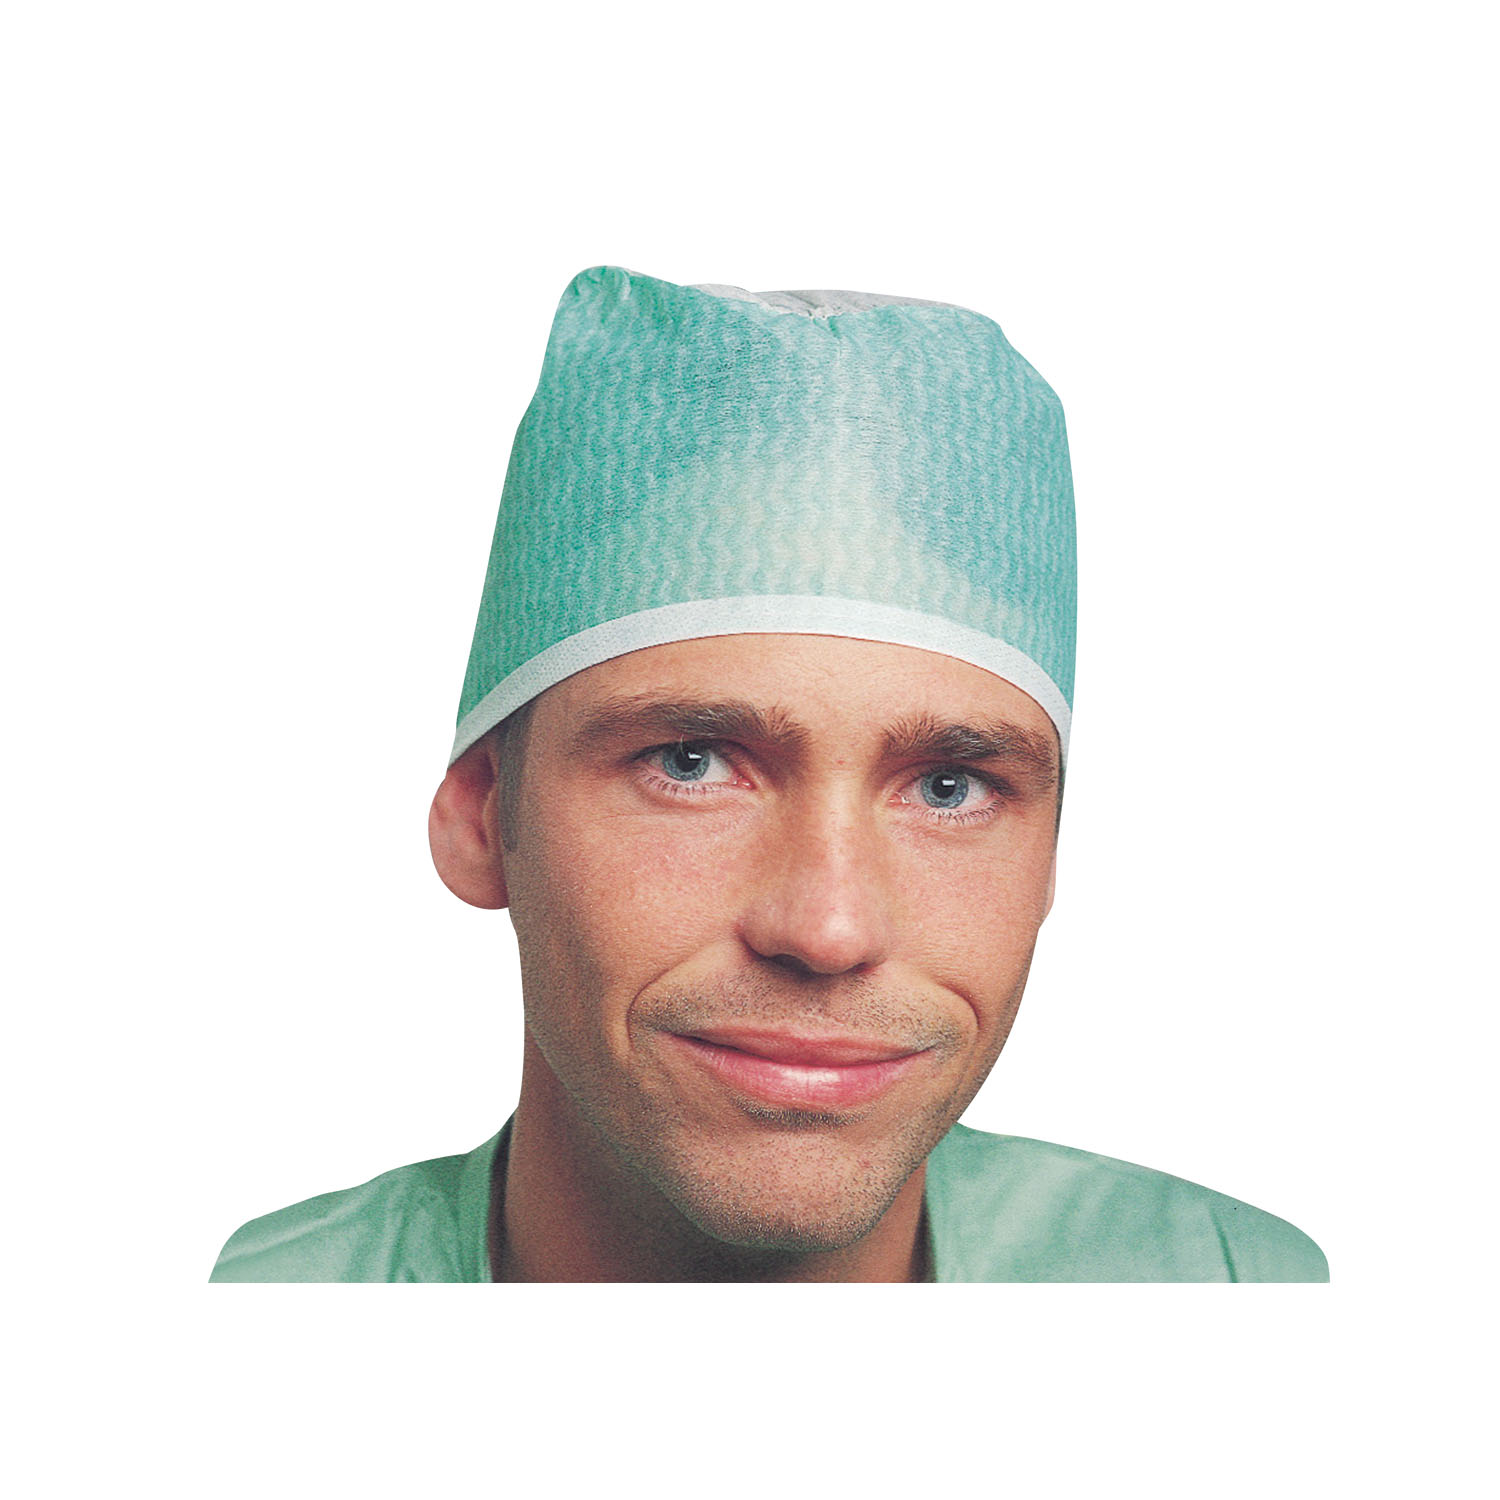 MOLNLYCKE BARRIER SURGICAL CAP : 621301 BX    $31.55 Stocked